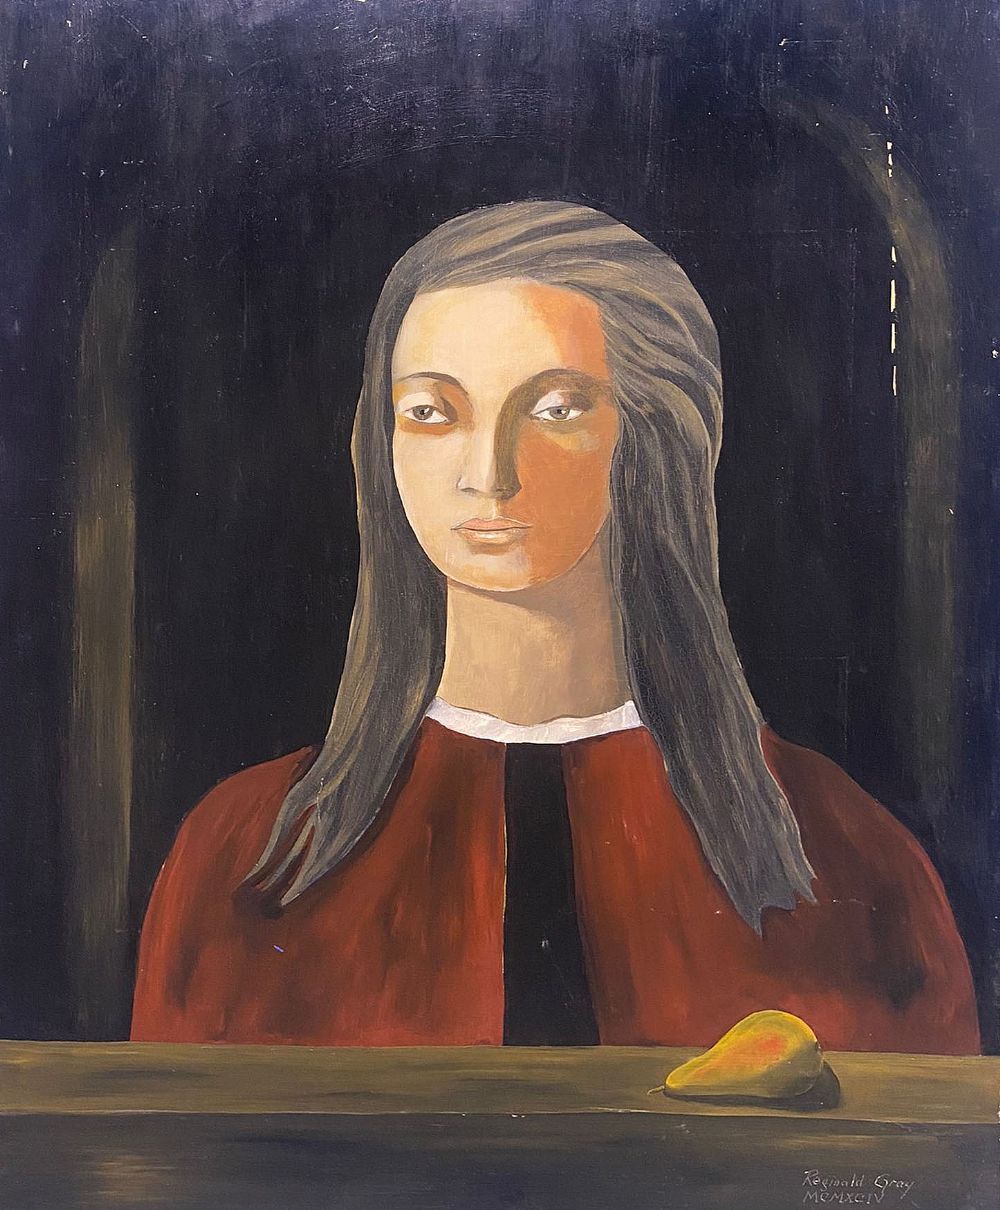 Lot 221 - PORTRAIT OF A WOMAN WITH PEAR, 1994 by Reginald Gray